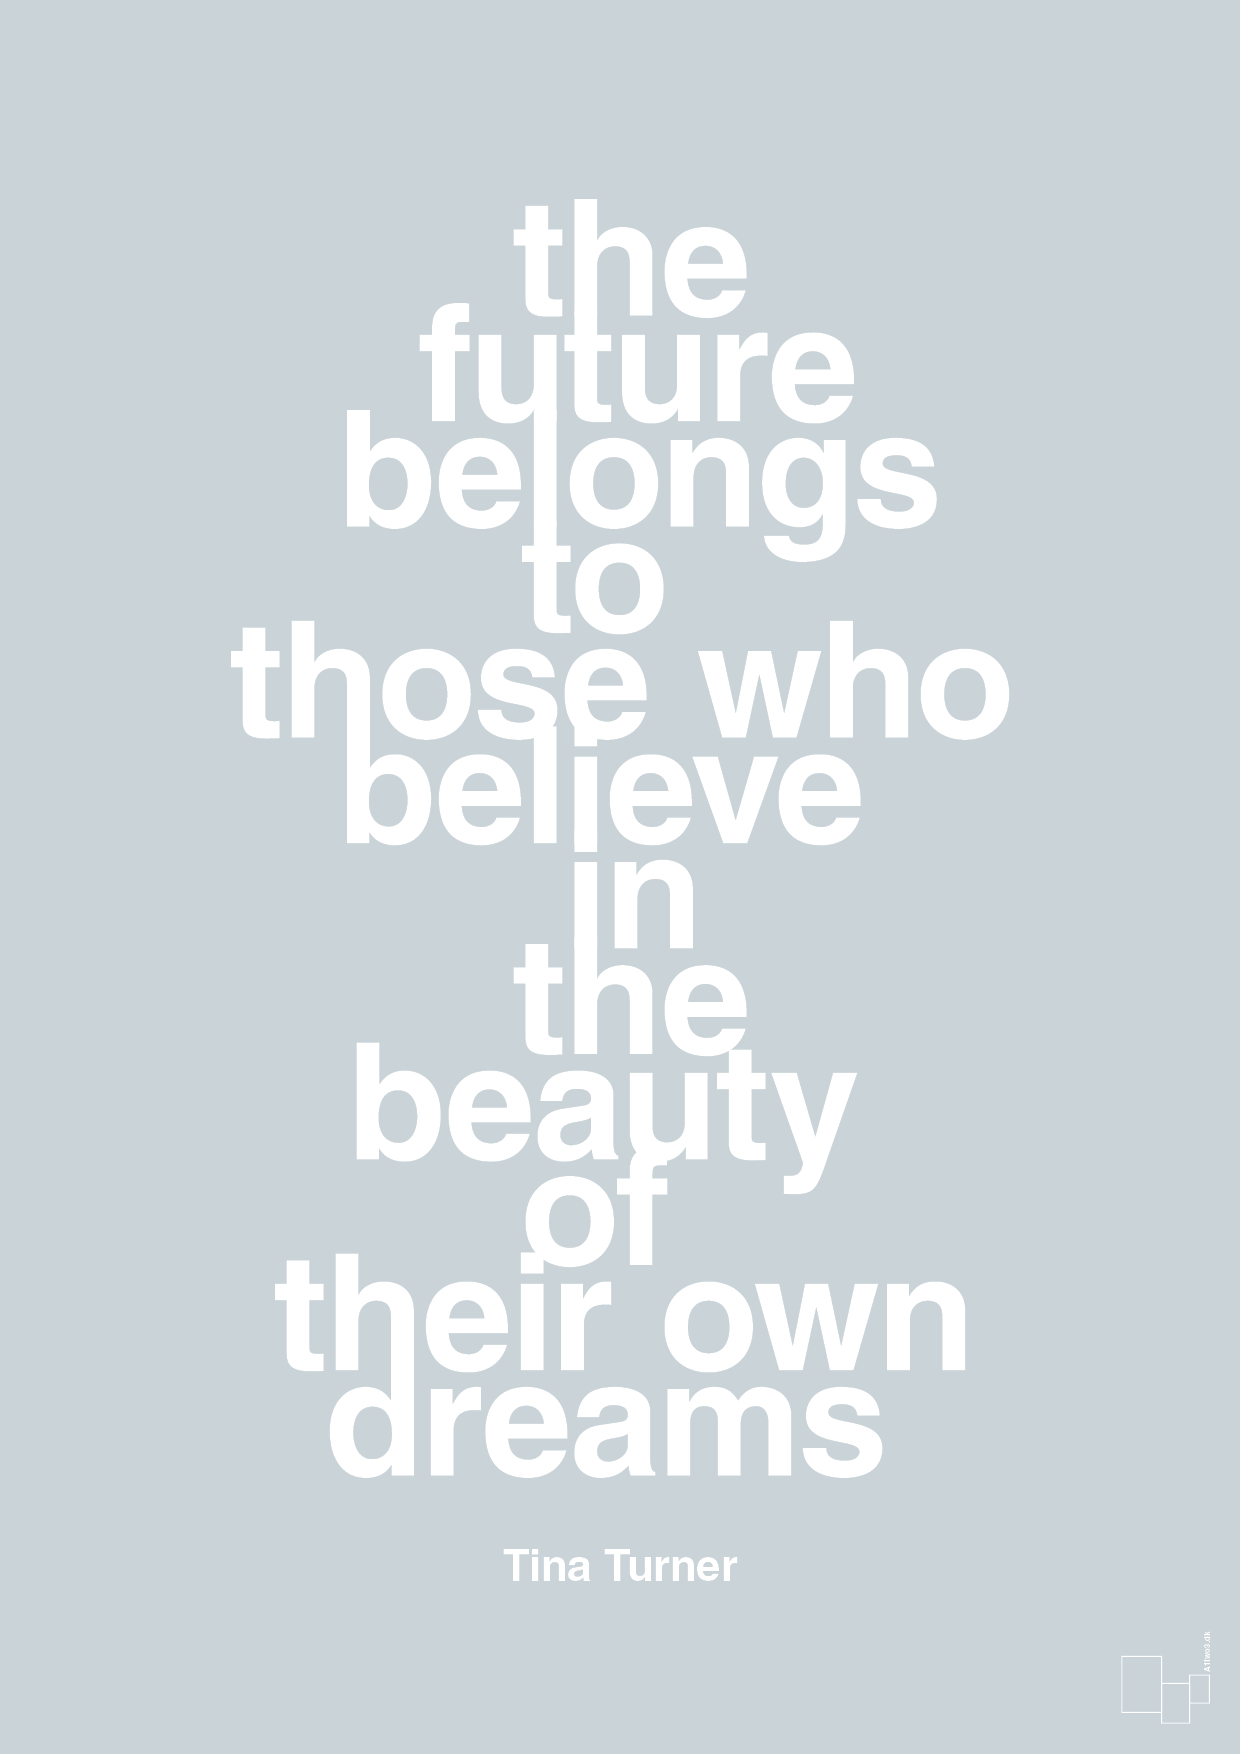 the future belongs to those who believe in the beauty of their own dreams - Plakat med Citater i Light Drizzle